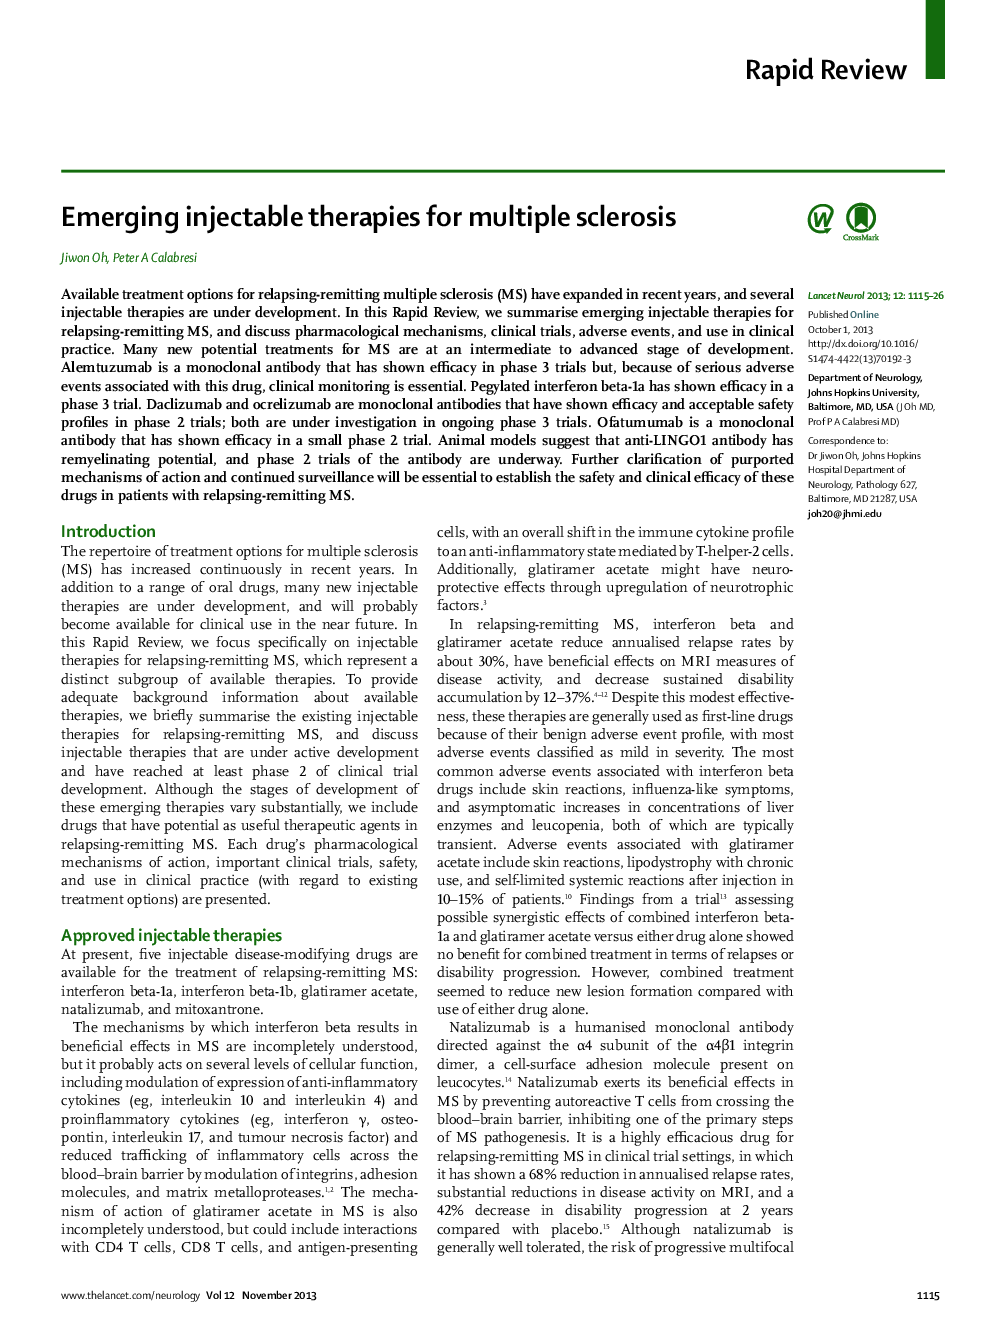 Emerging injectable therapies for multiple sclerosis